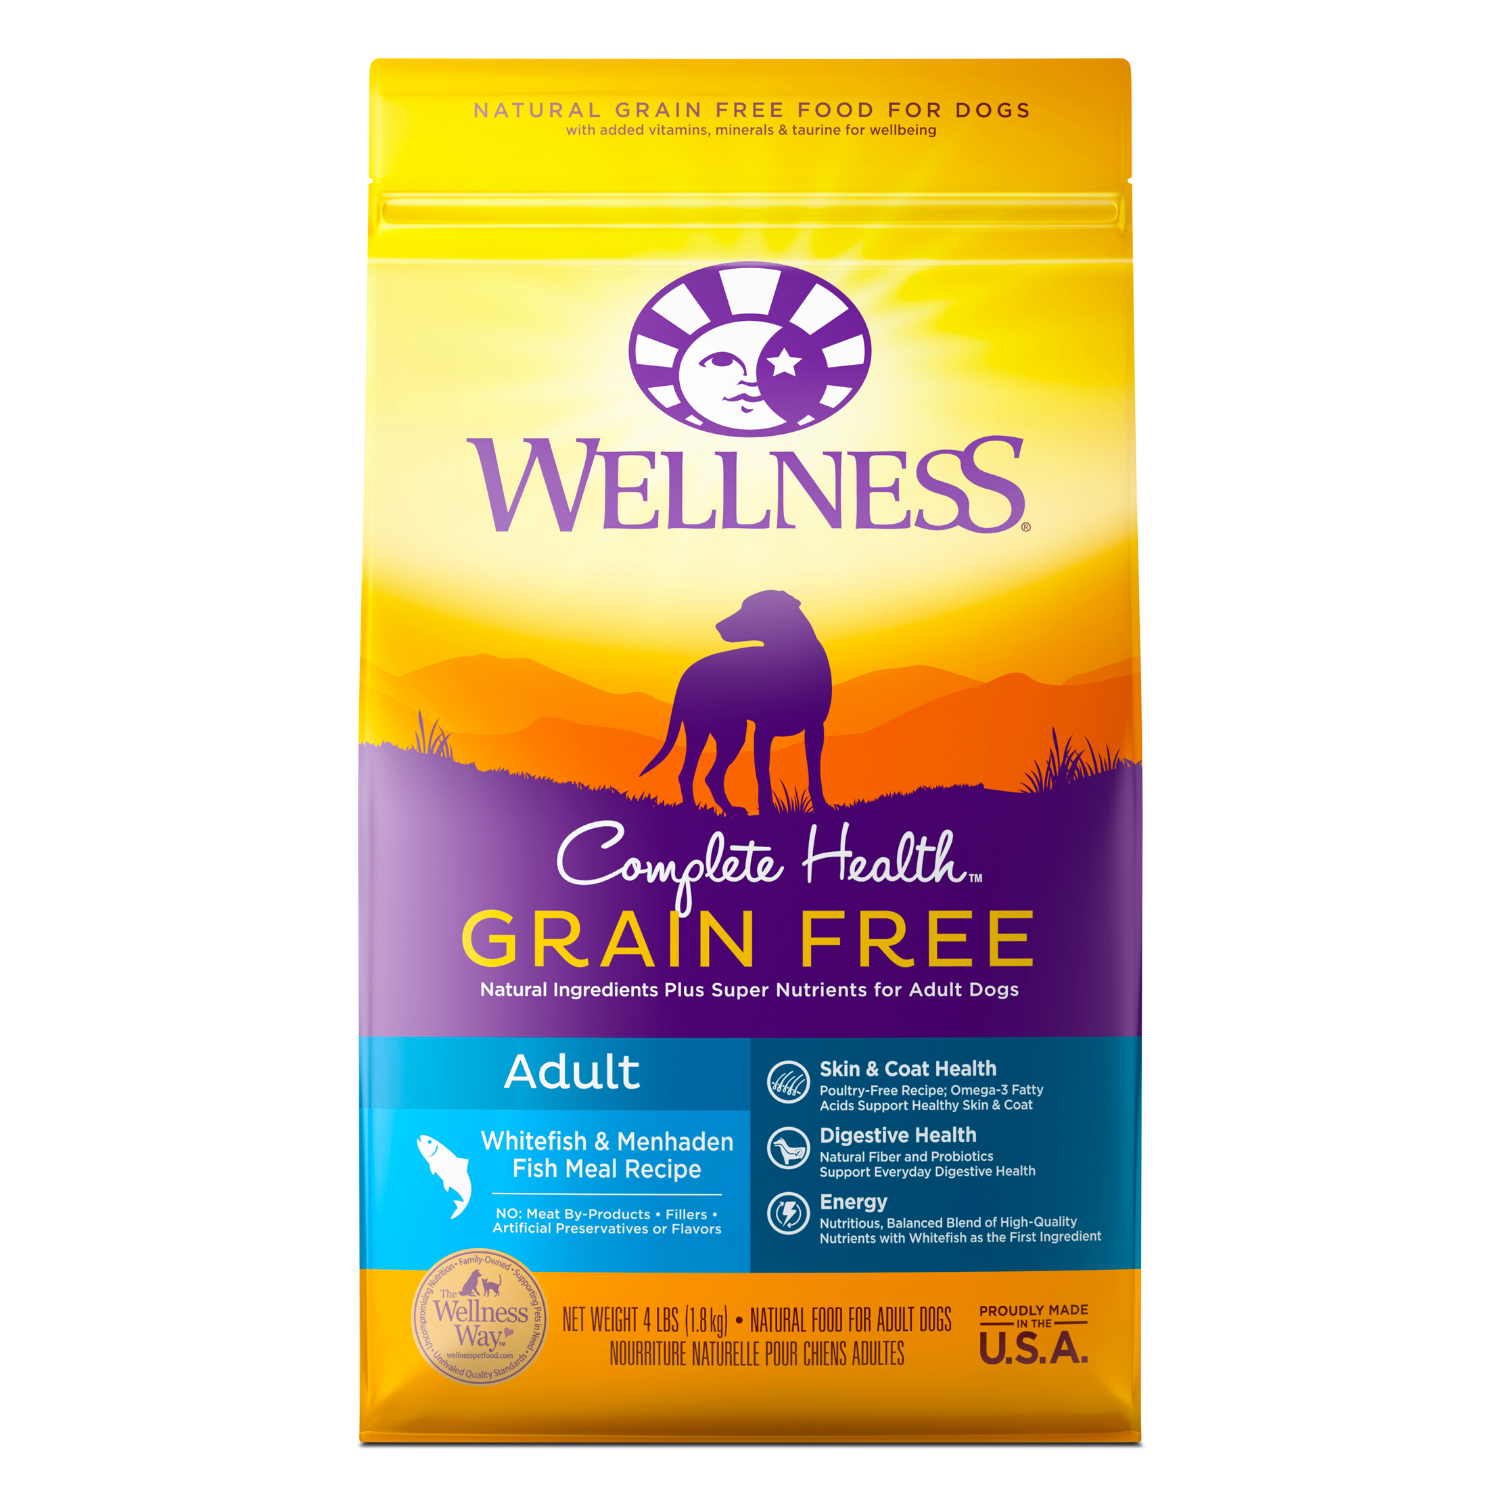 Wellness Complete Health Grain Free for Adult - (Whitefish and Menhaden Fish Meal) - 1.81kg / 10.89kg